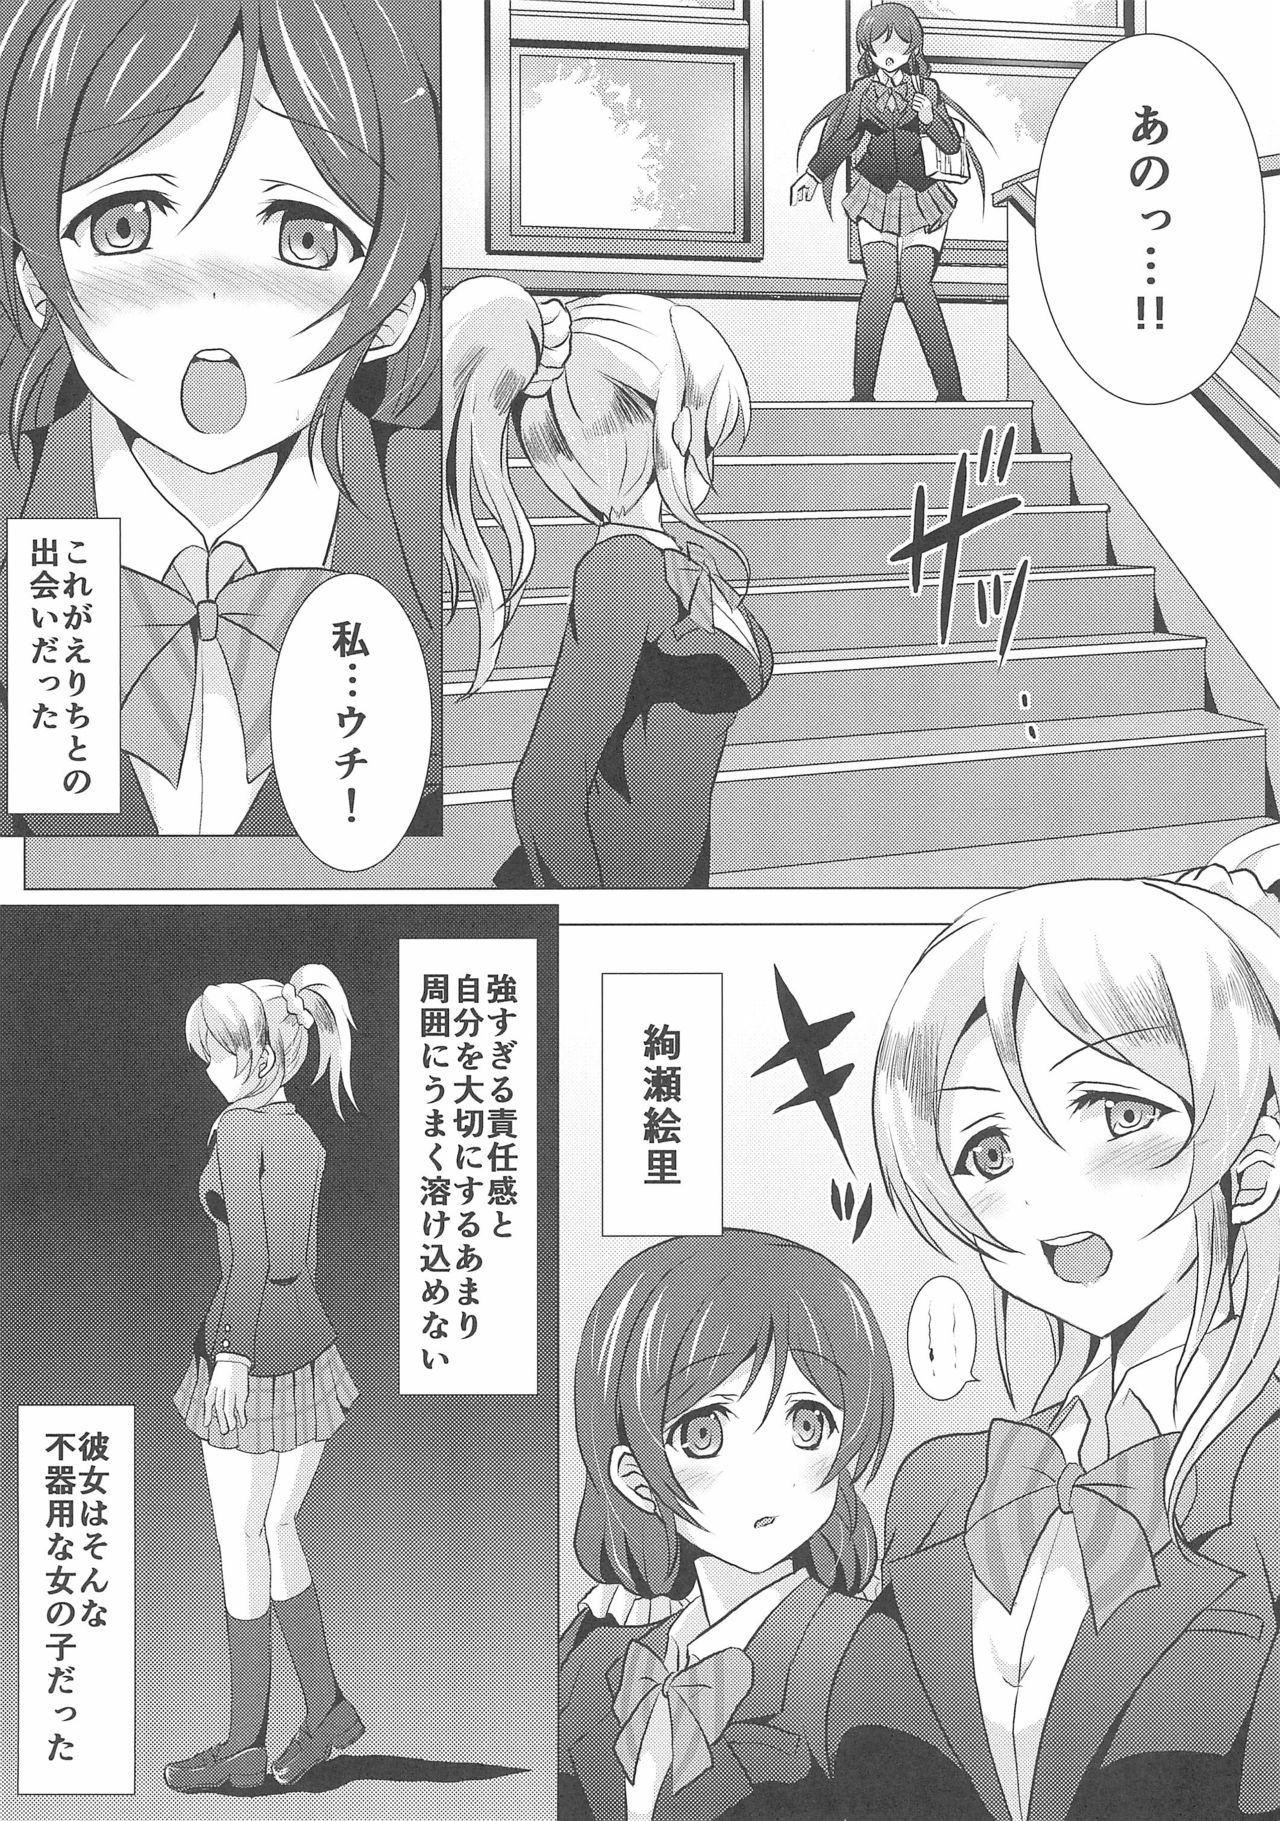 Ball Licking Loneliest Princess - Love live Tan - Page 5